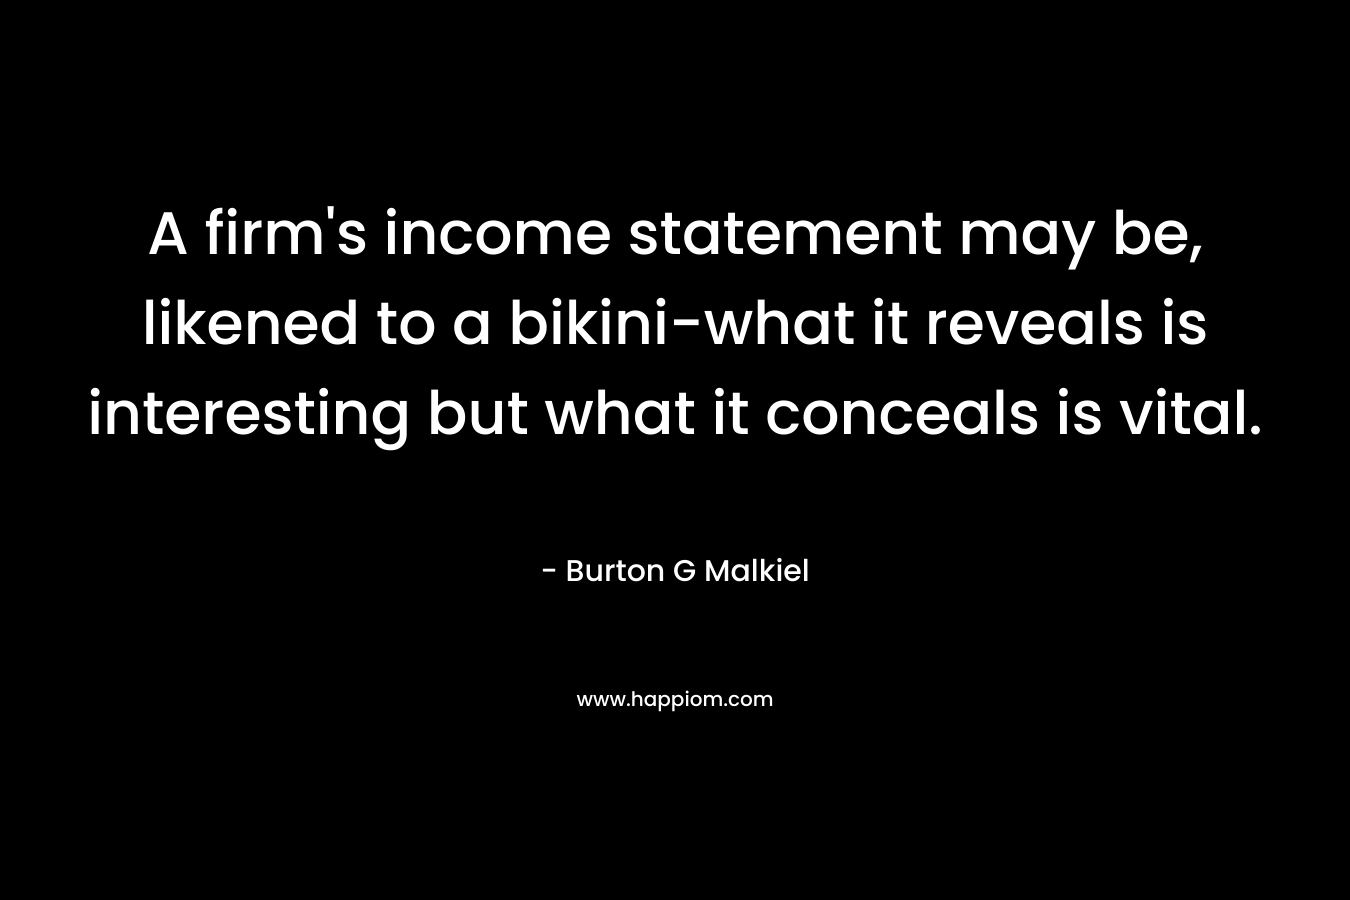 A firm's income statement may be, likened to a bikini-what it reveals is interesting but what it conceals is vital.